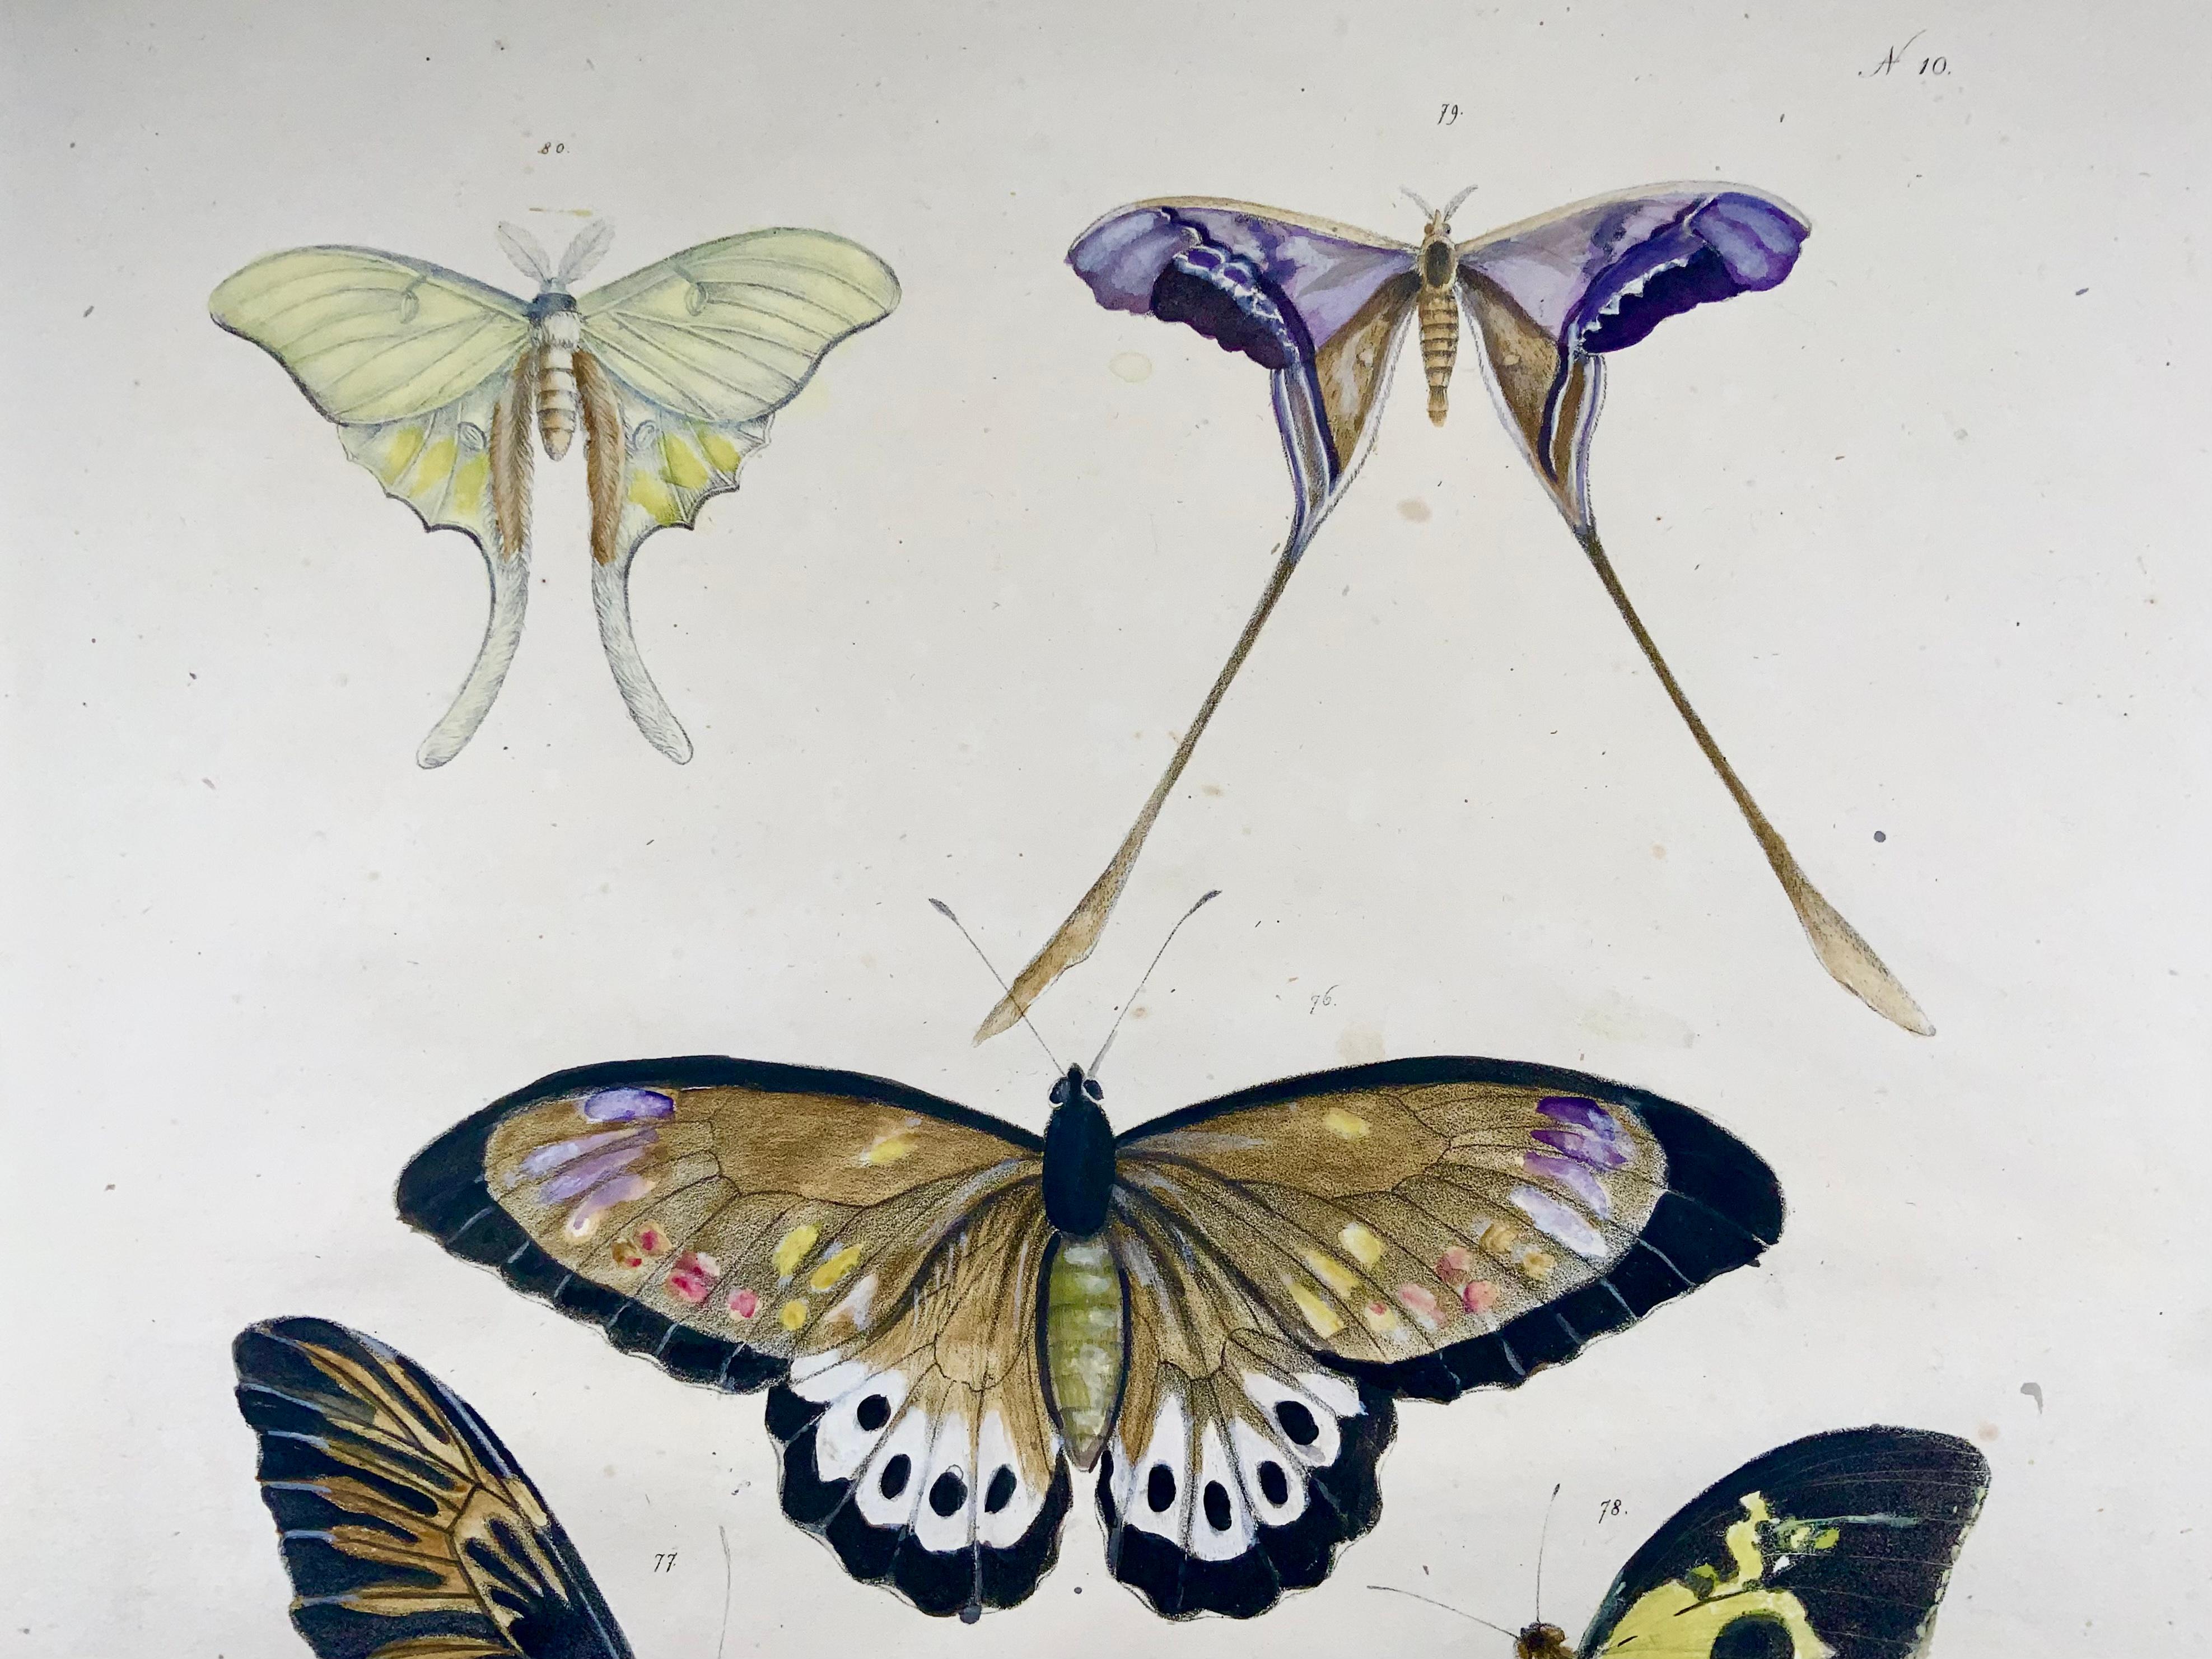 Hand-Painted Butterflies, Imperial Folio, Incunabula of Lithography, Scarce For Sale